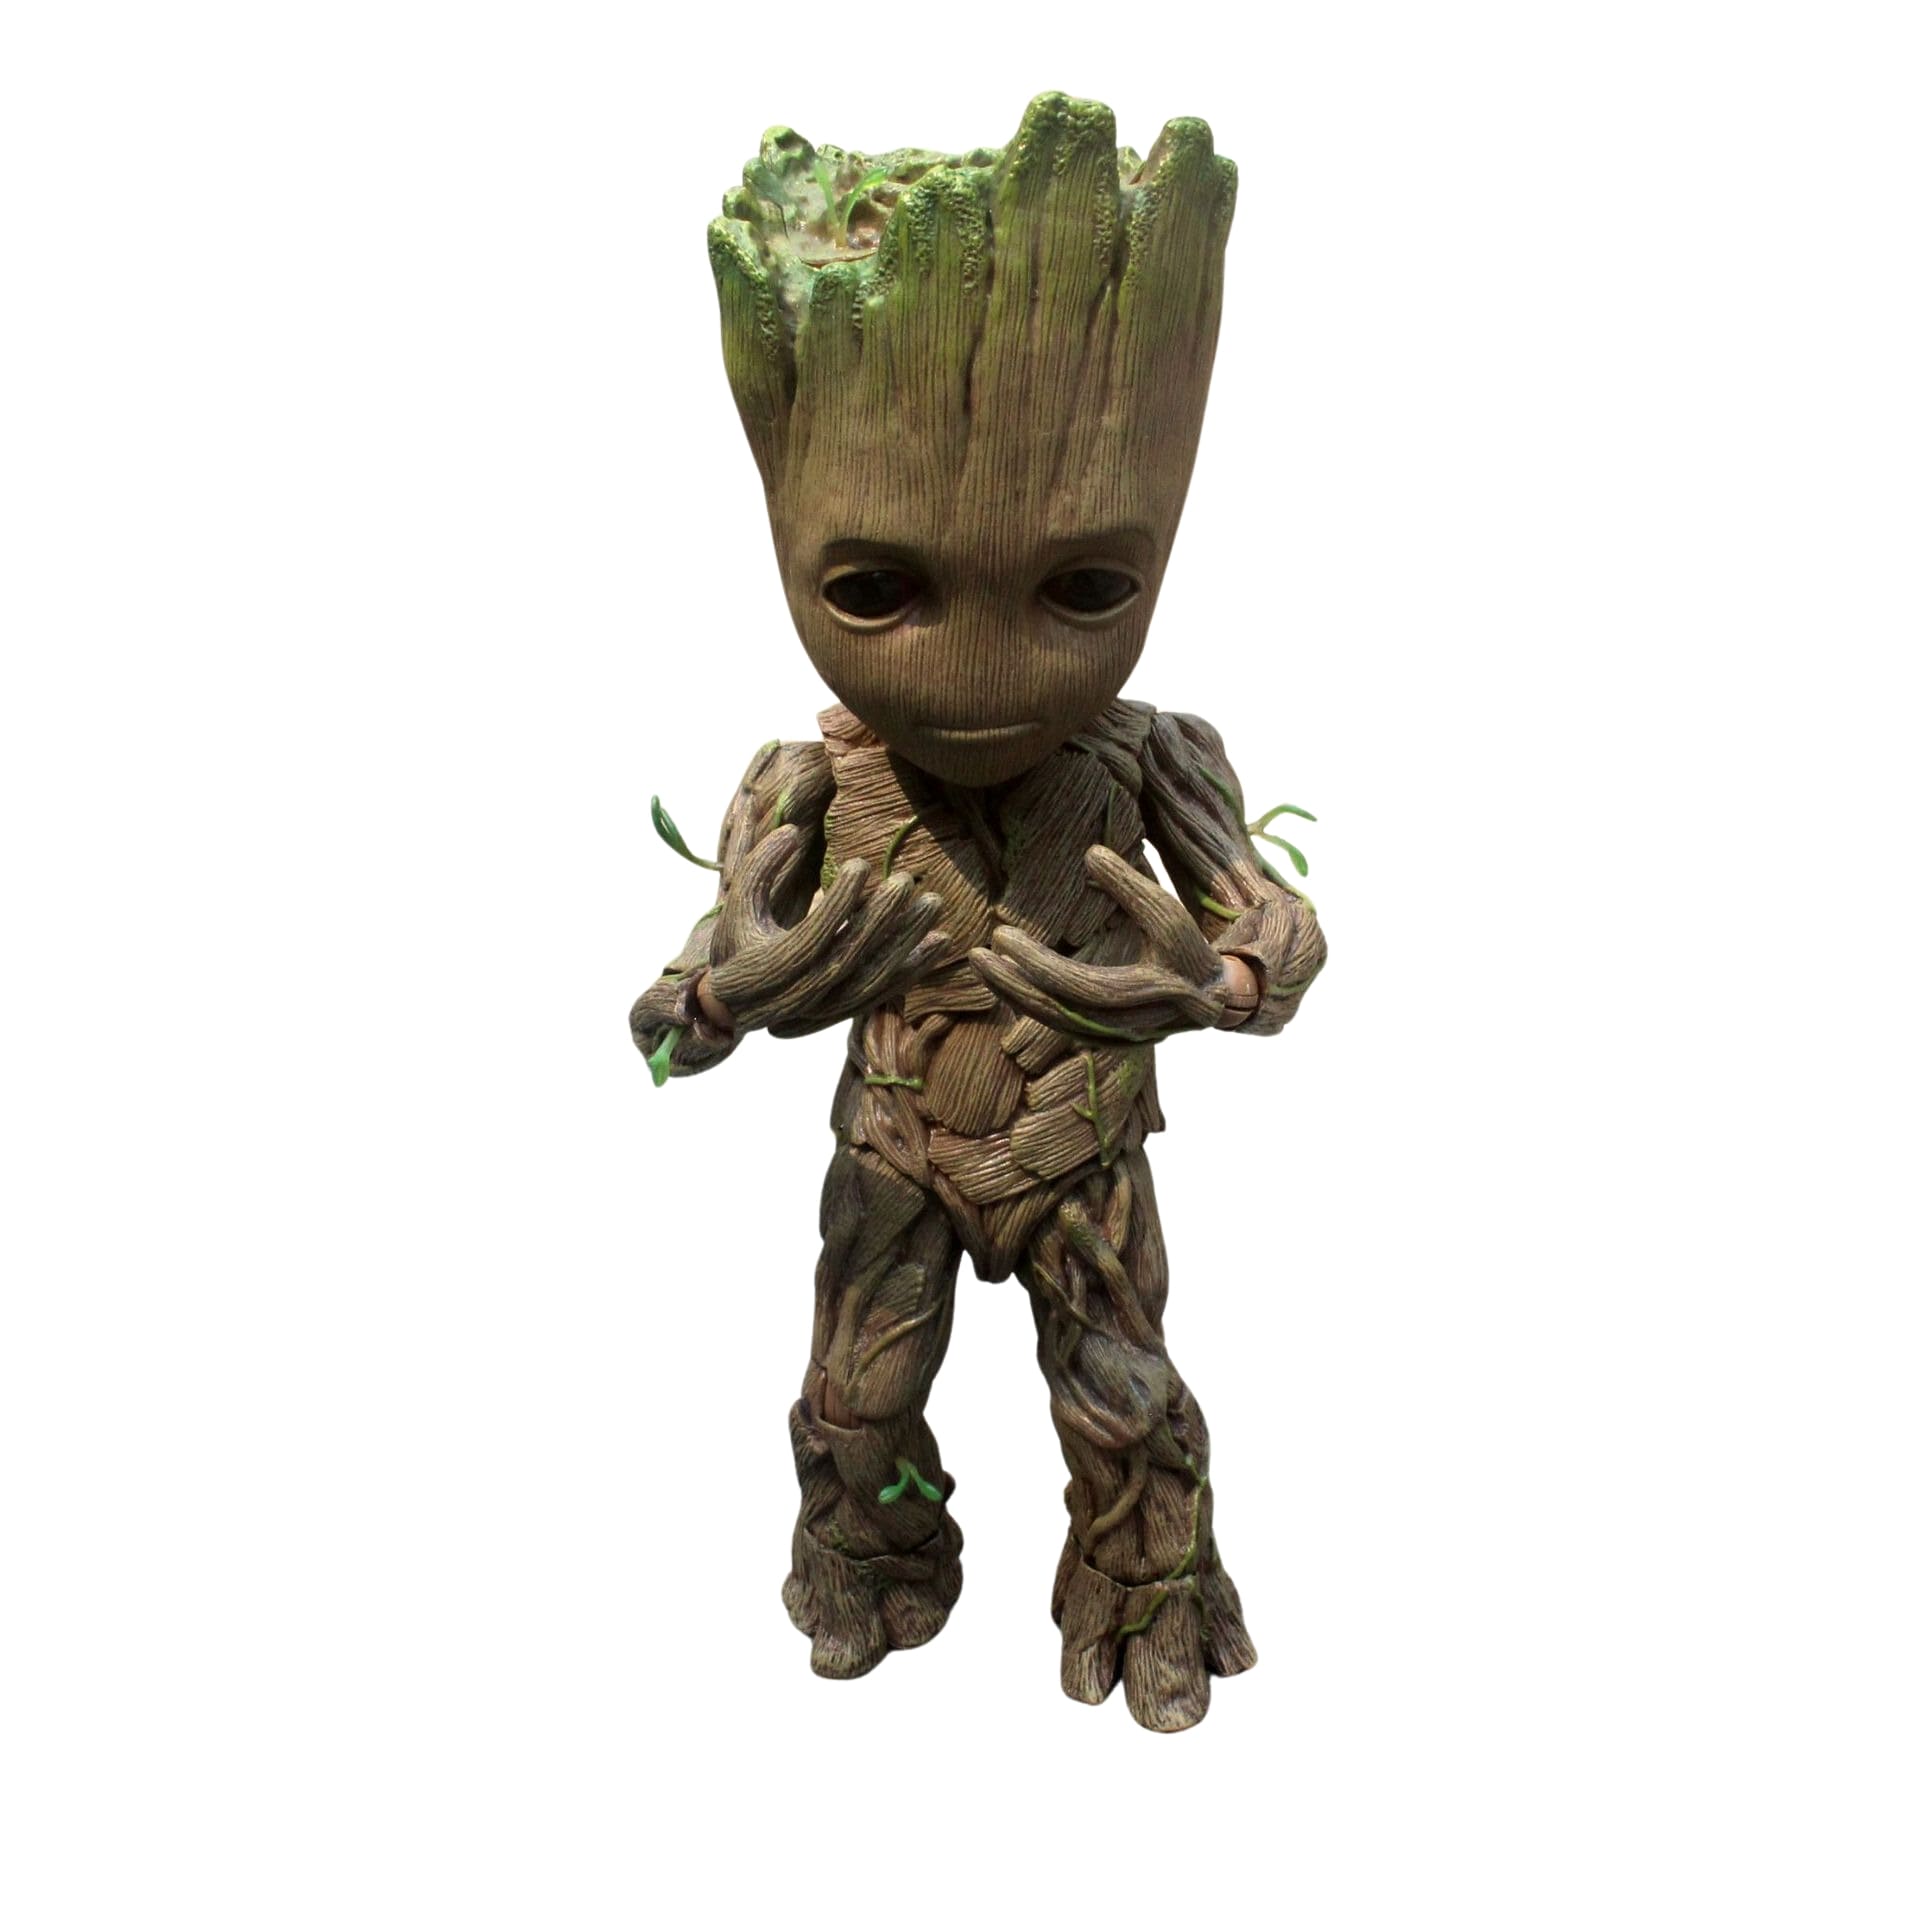 ActionFigure,  BebêGroot,  GuardiõesDaGaláxia,  Disney,  MarvelCollectibles,  GeekMerchandise,  NerdToys,  MarvelHeroes,  MarvelFans,  MarvelCollectors,  DisneyCollectibles,  GuardiansOfTheGalaxy,  GrootFigure,  ToyCollector,  MarvelUniverse,  MarvelCinematicUniverse,  LimitedEdition,  HighQualityCollectibles,  MustHaveCollectibles,  GeekCulture,  NerdLife